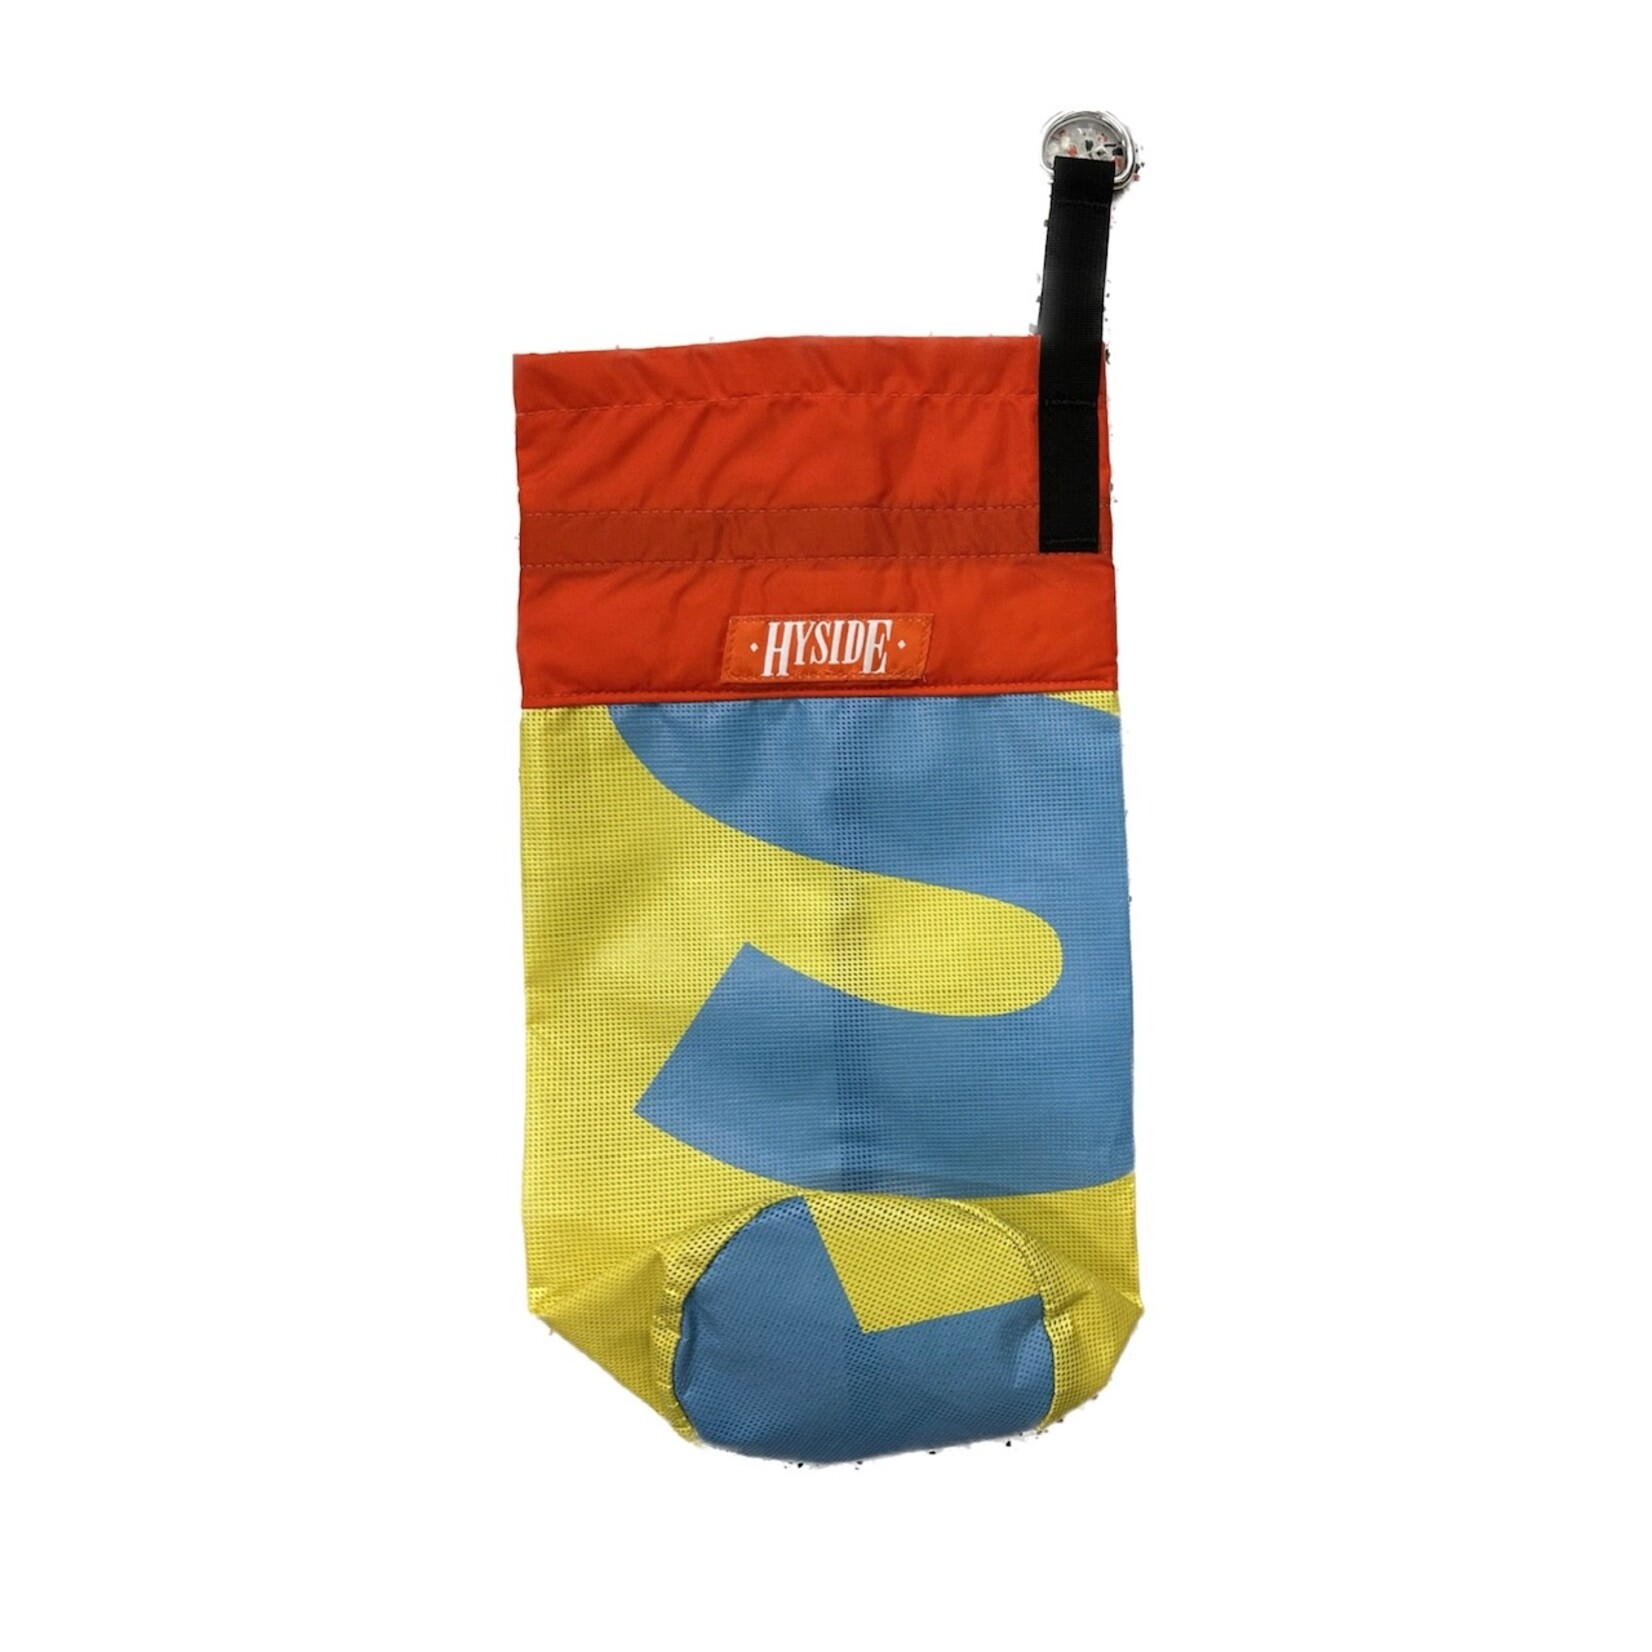 Hyside Inflatables HYSIDE Up-Cycle Strap Bag